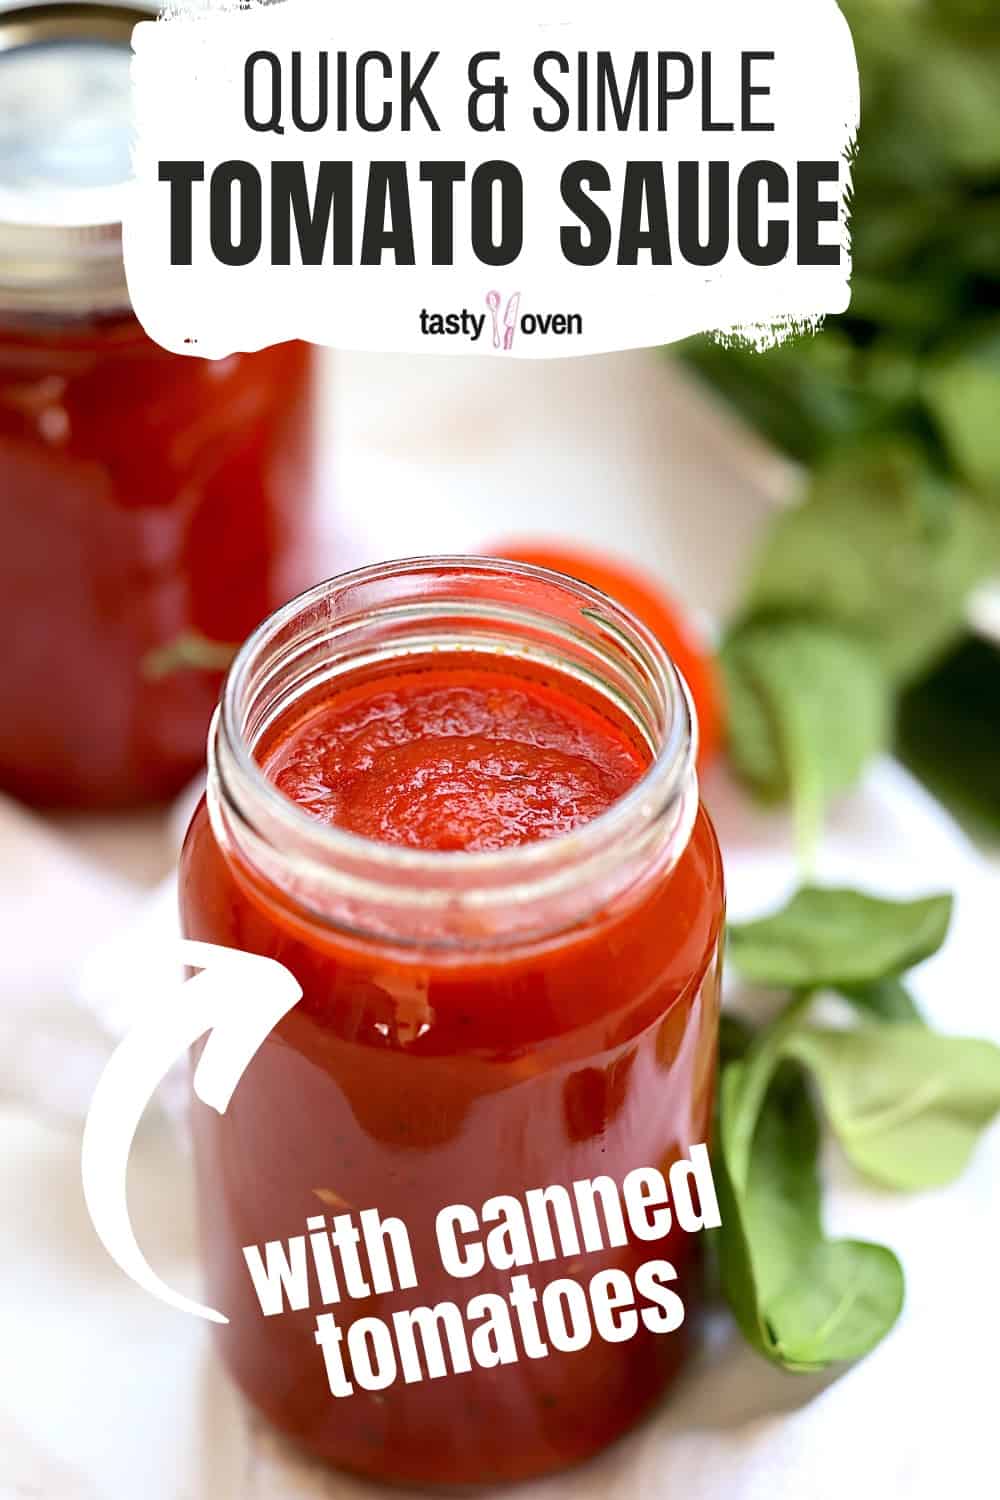 Homemade Tomato Sauce with Canned Tomatoes